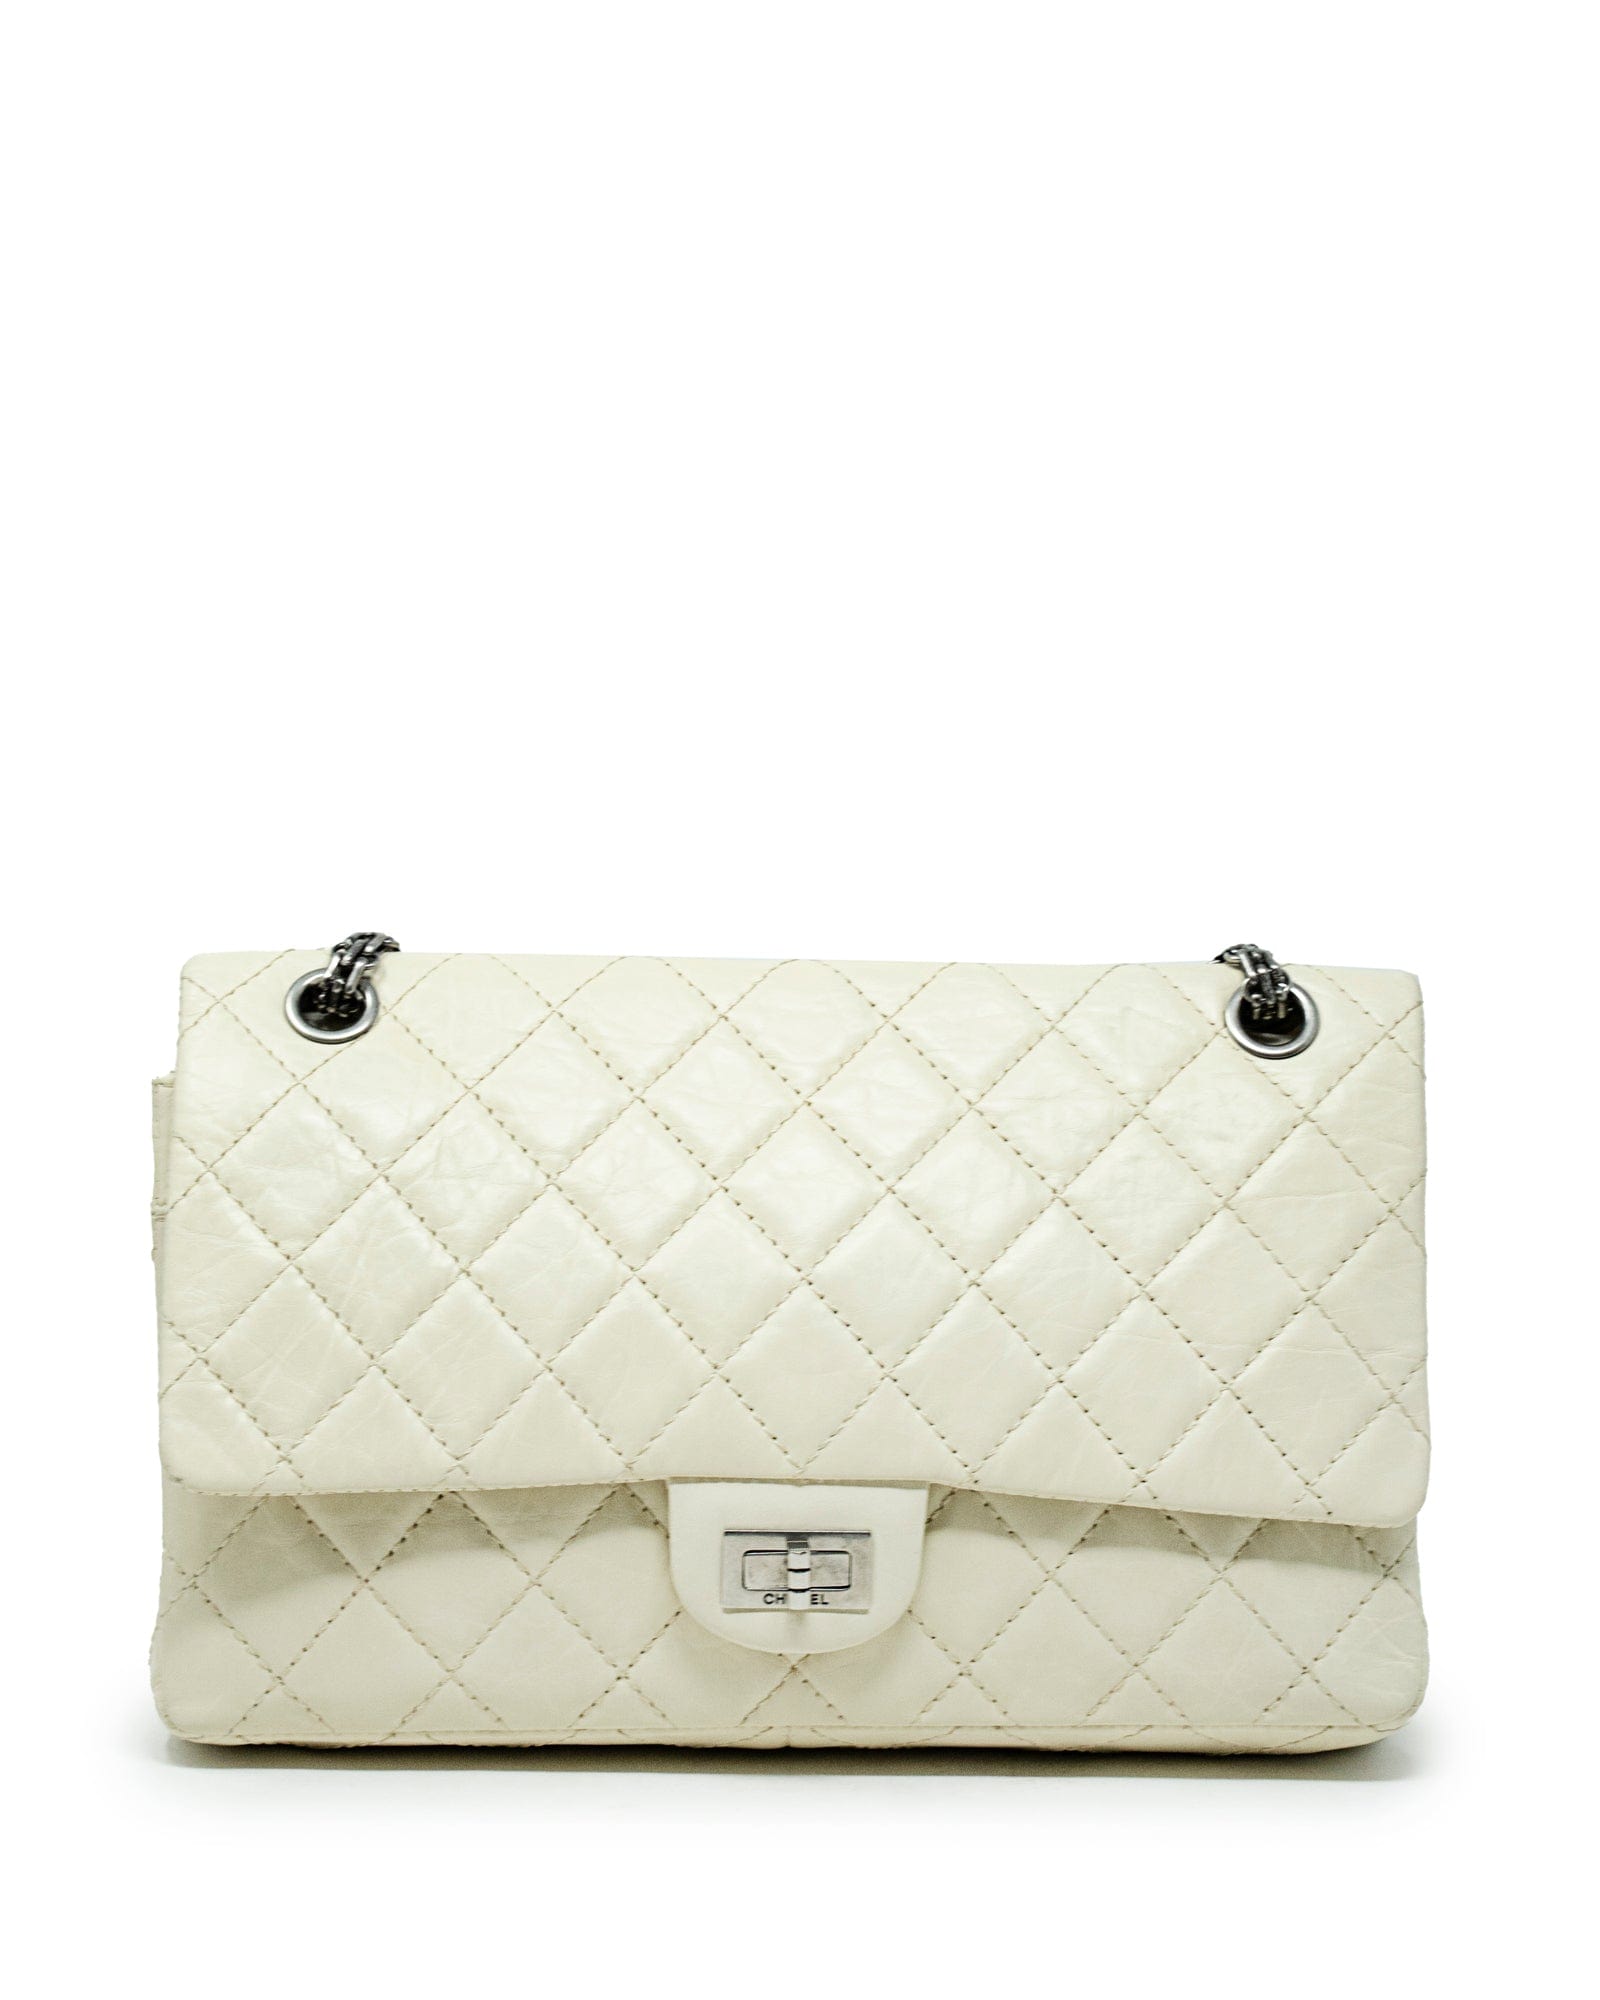 Cream Colour Mini Reissue 2.55 Bag in aged Calfskin Leather with